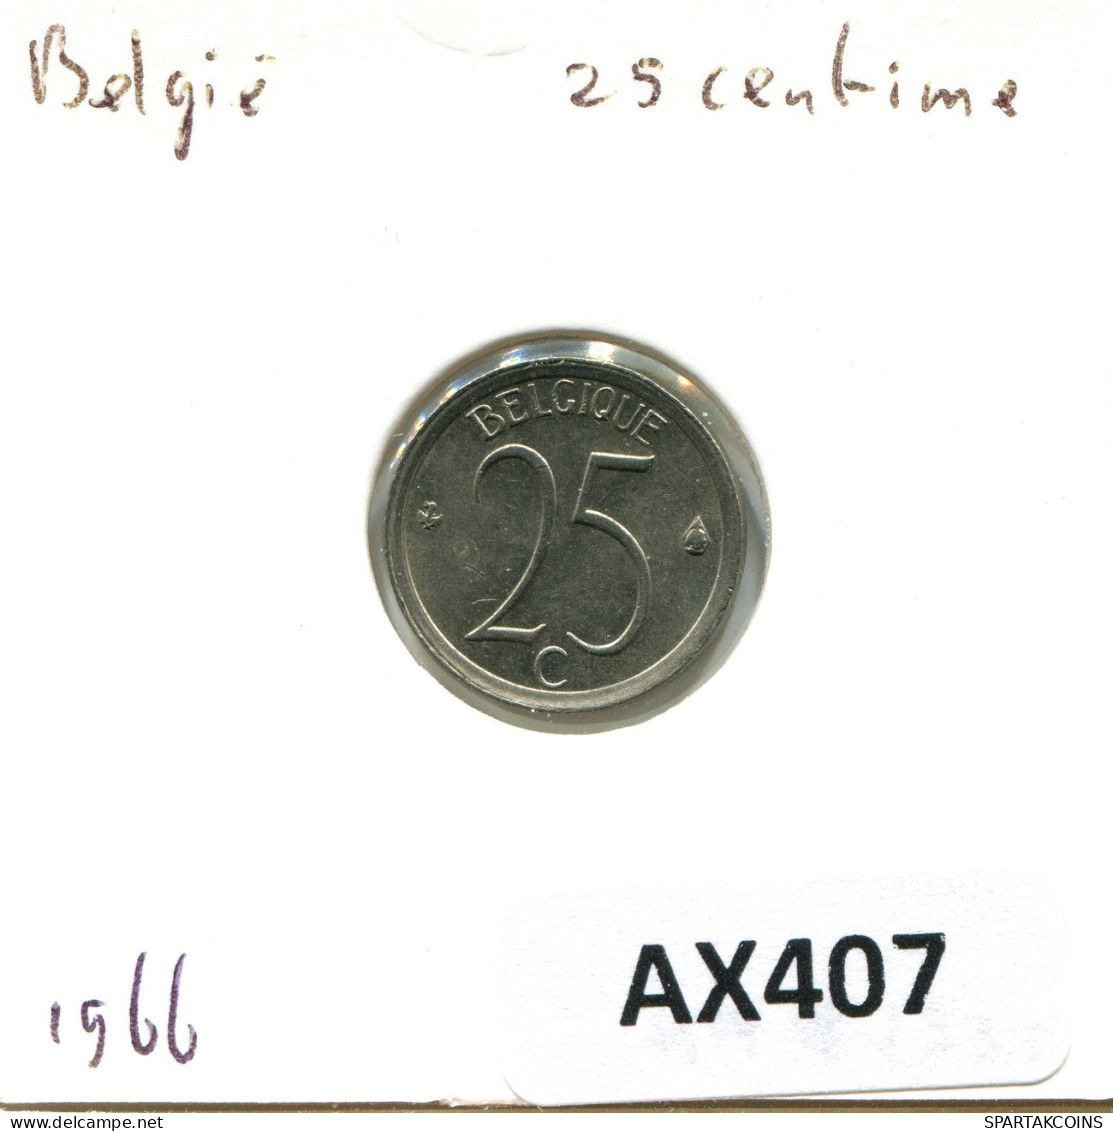 25 CENTIMES 1966 FRENCH Text BELGIUM Coin #AX407.U.A - 25 Cents